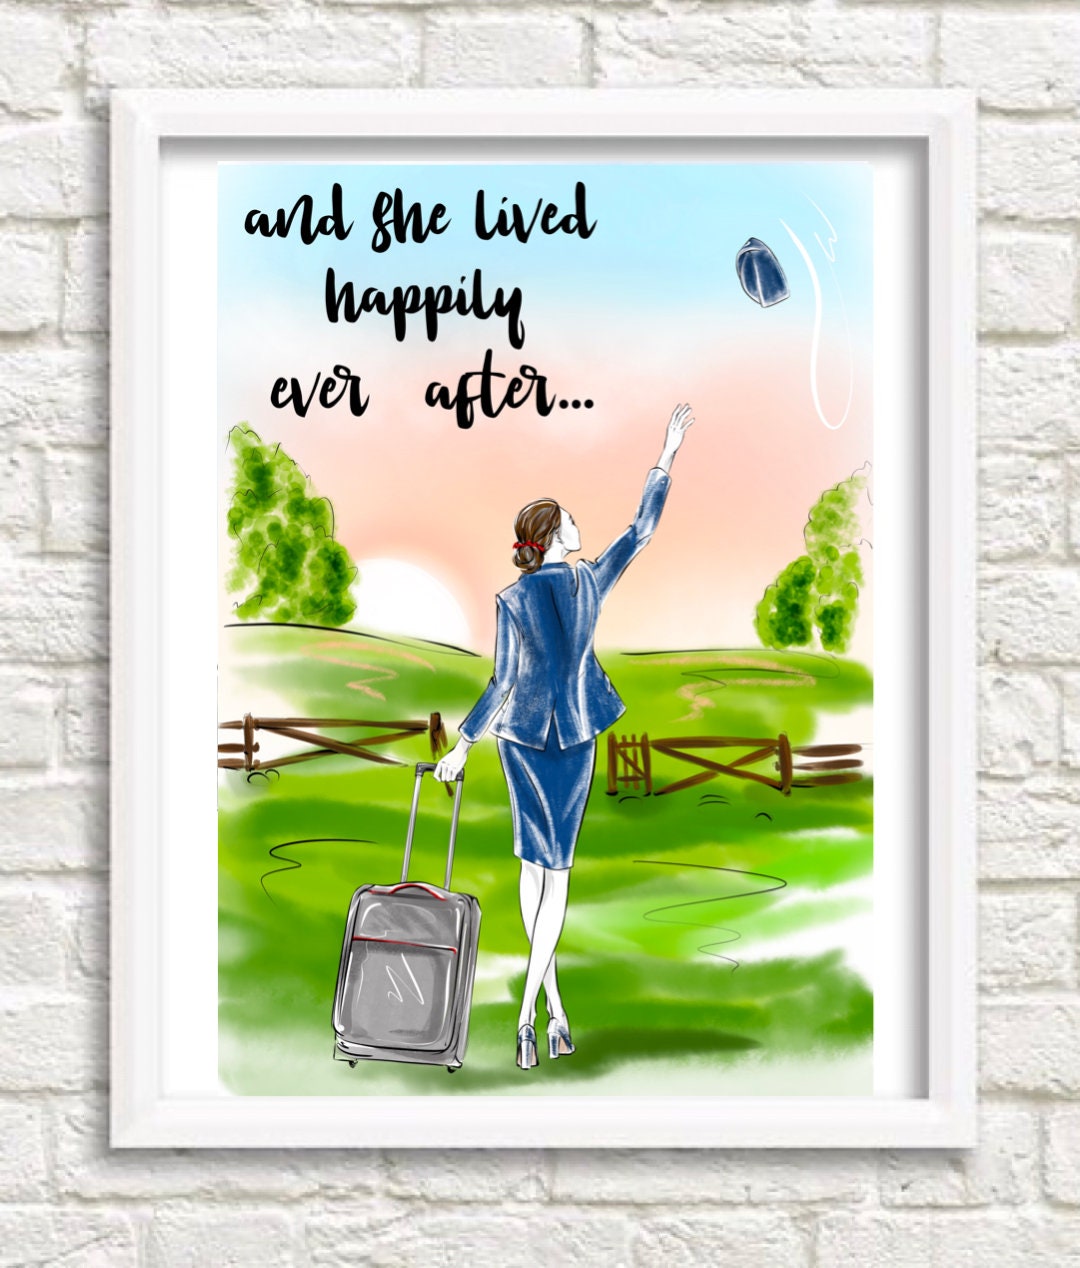 British Airways Flight Attendant Travel Print - And She Lived Happily Ever After